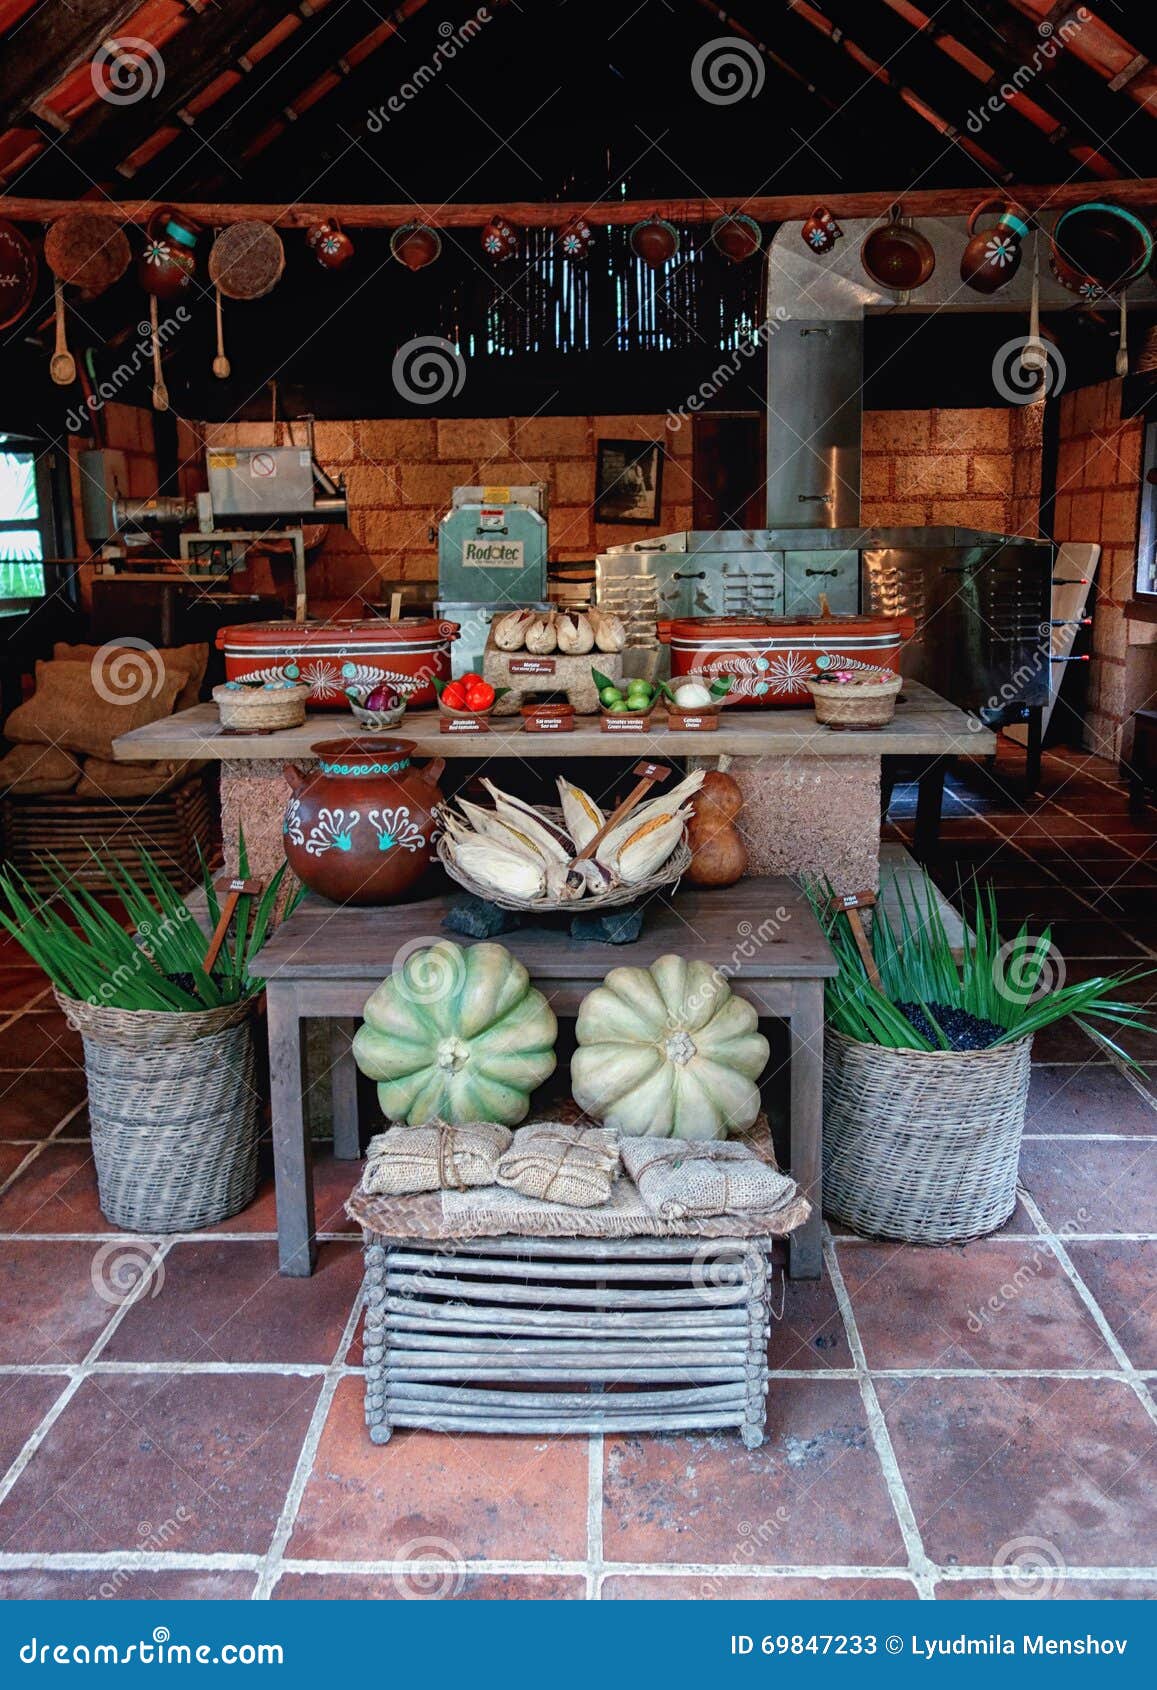 https://thumbs.dreamstime.com/z/layout-traditional-mexican-kitchen-cuisine-cooking-utensils-dishes-fruits-vegetables-69847233.jpg